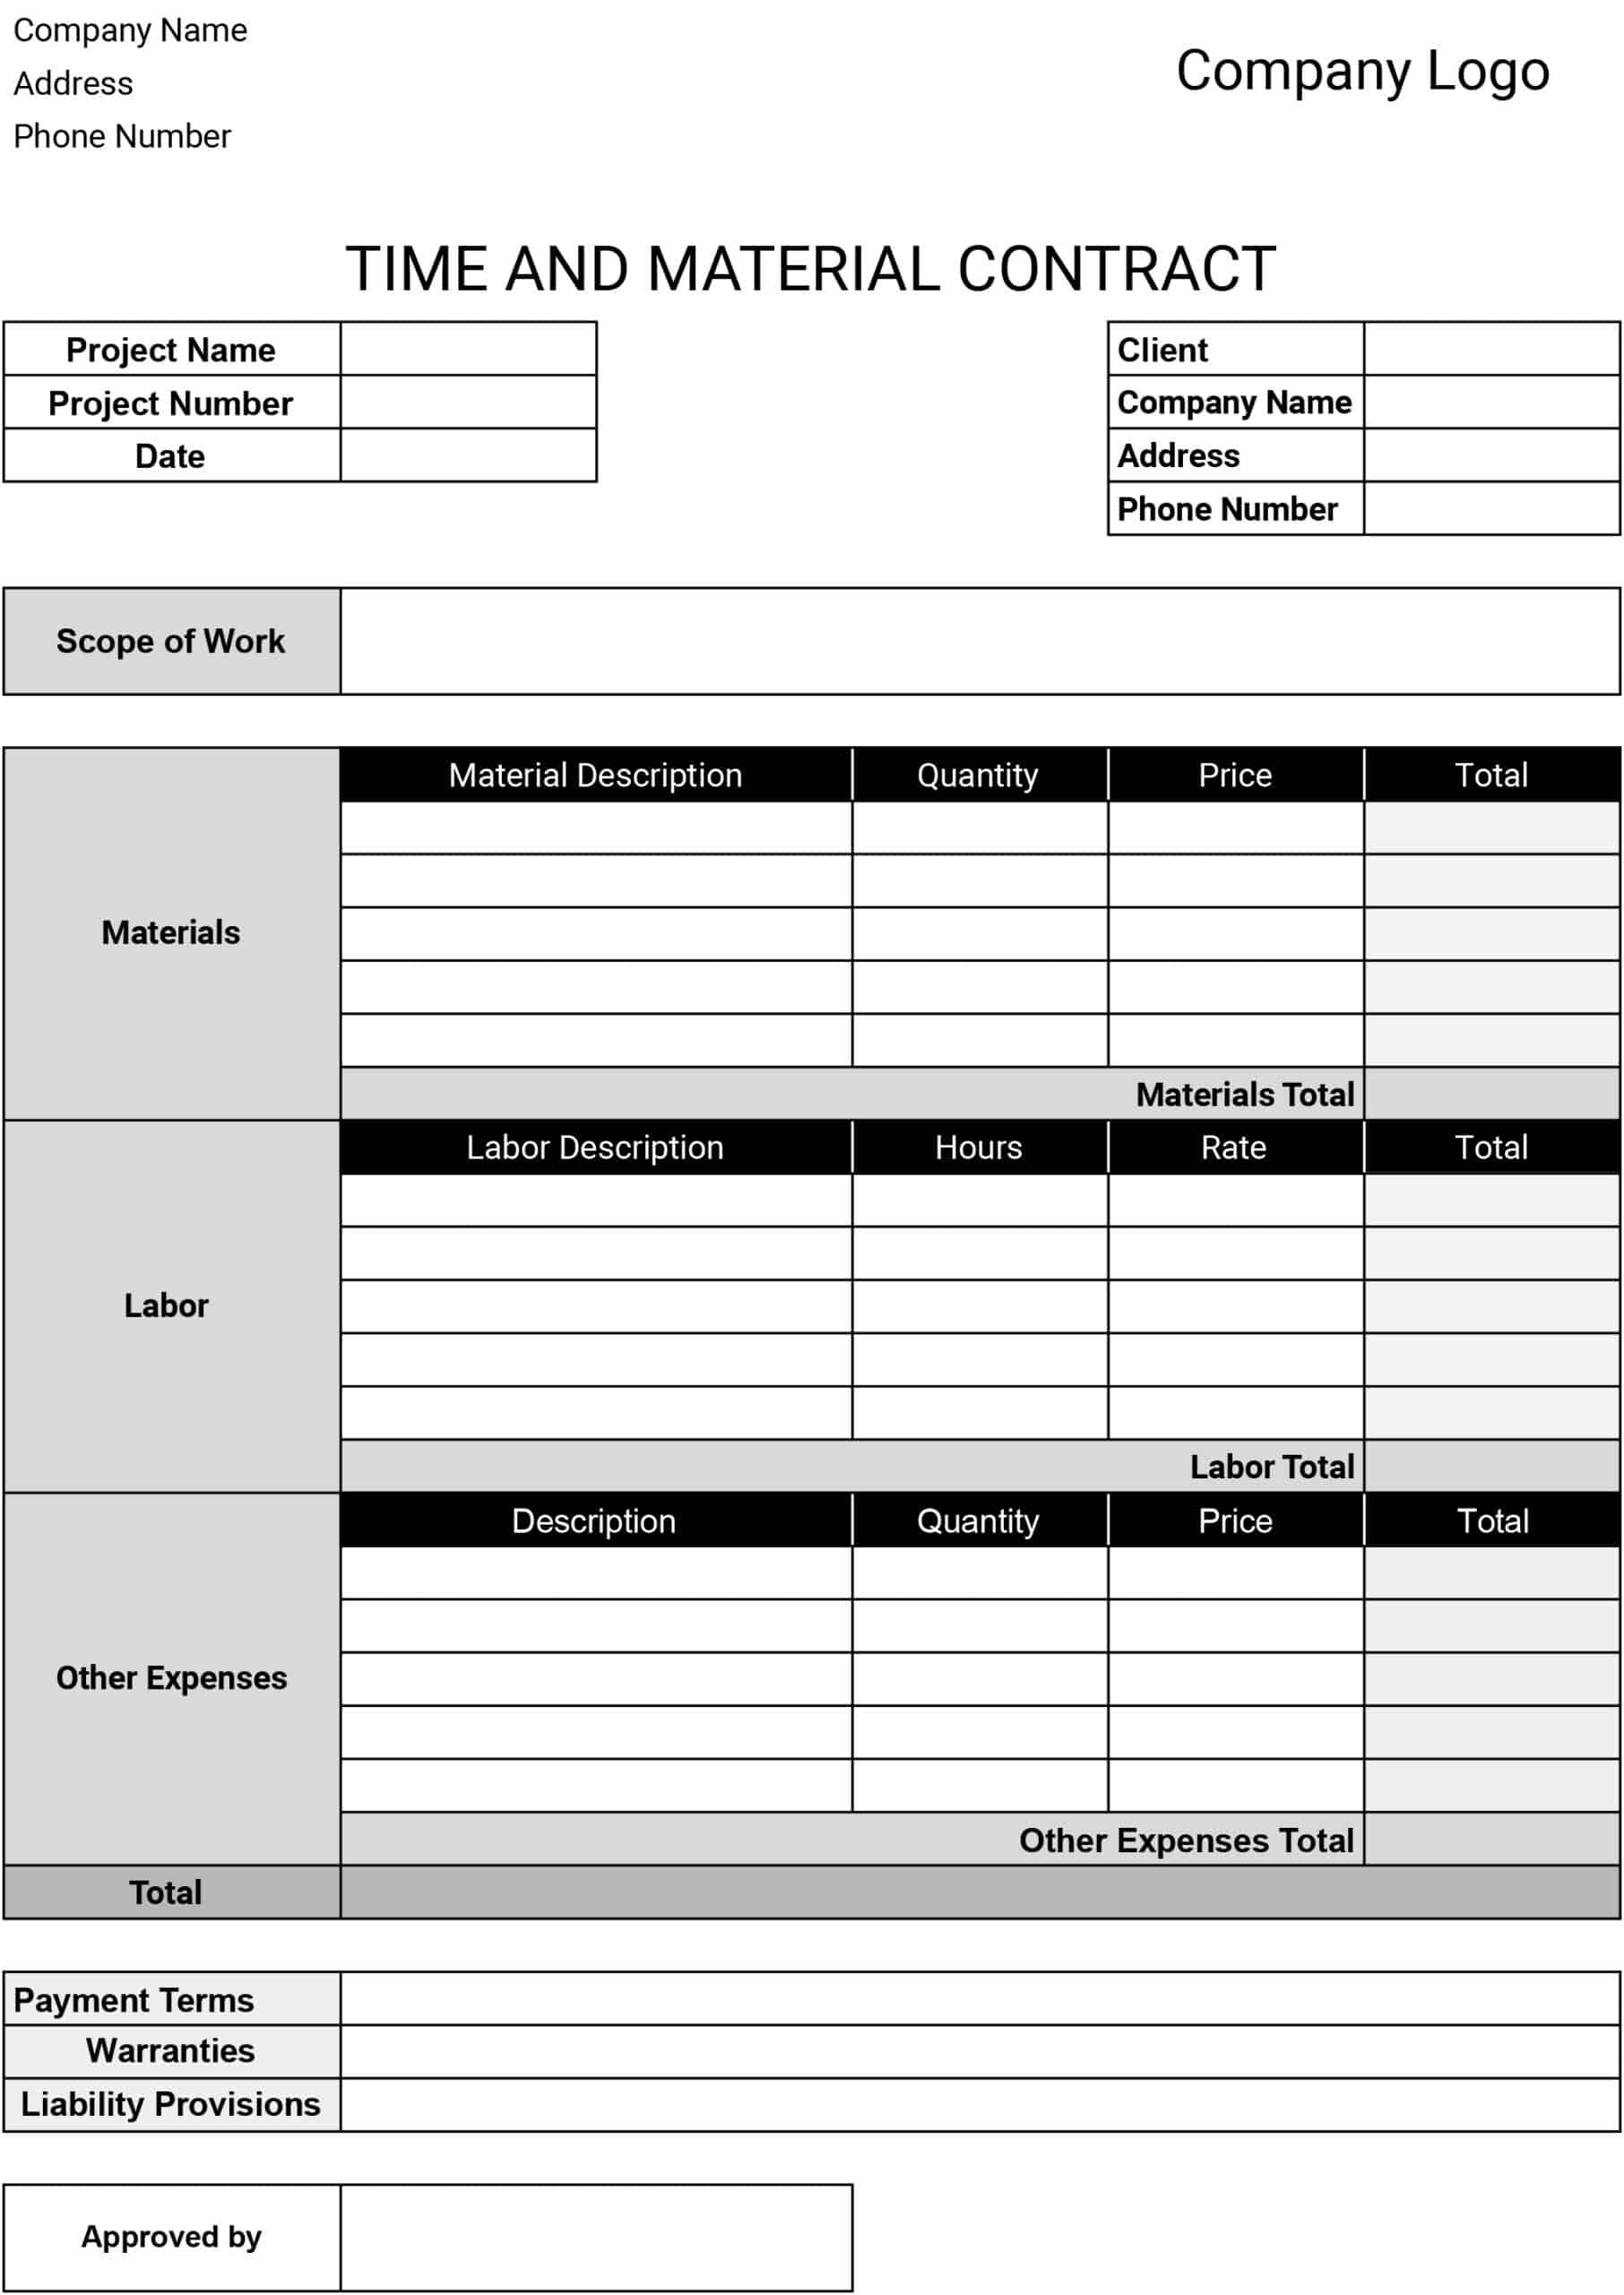 Printable T M Contract Template